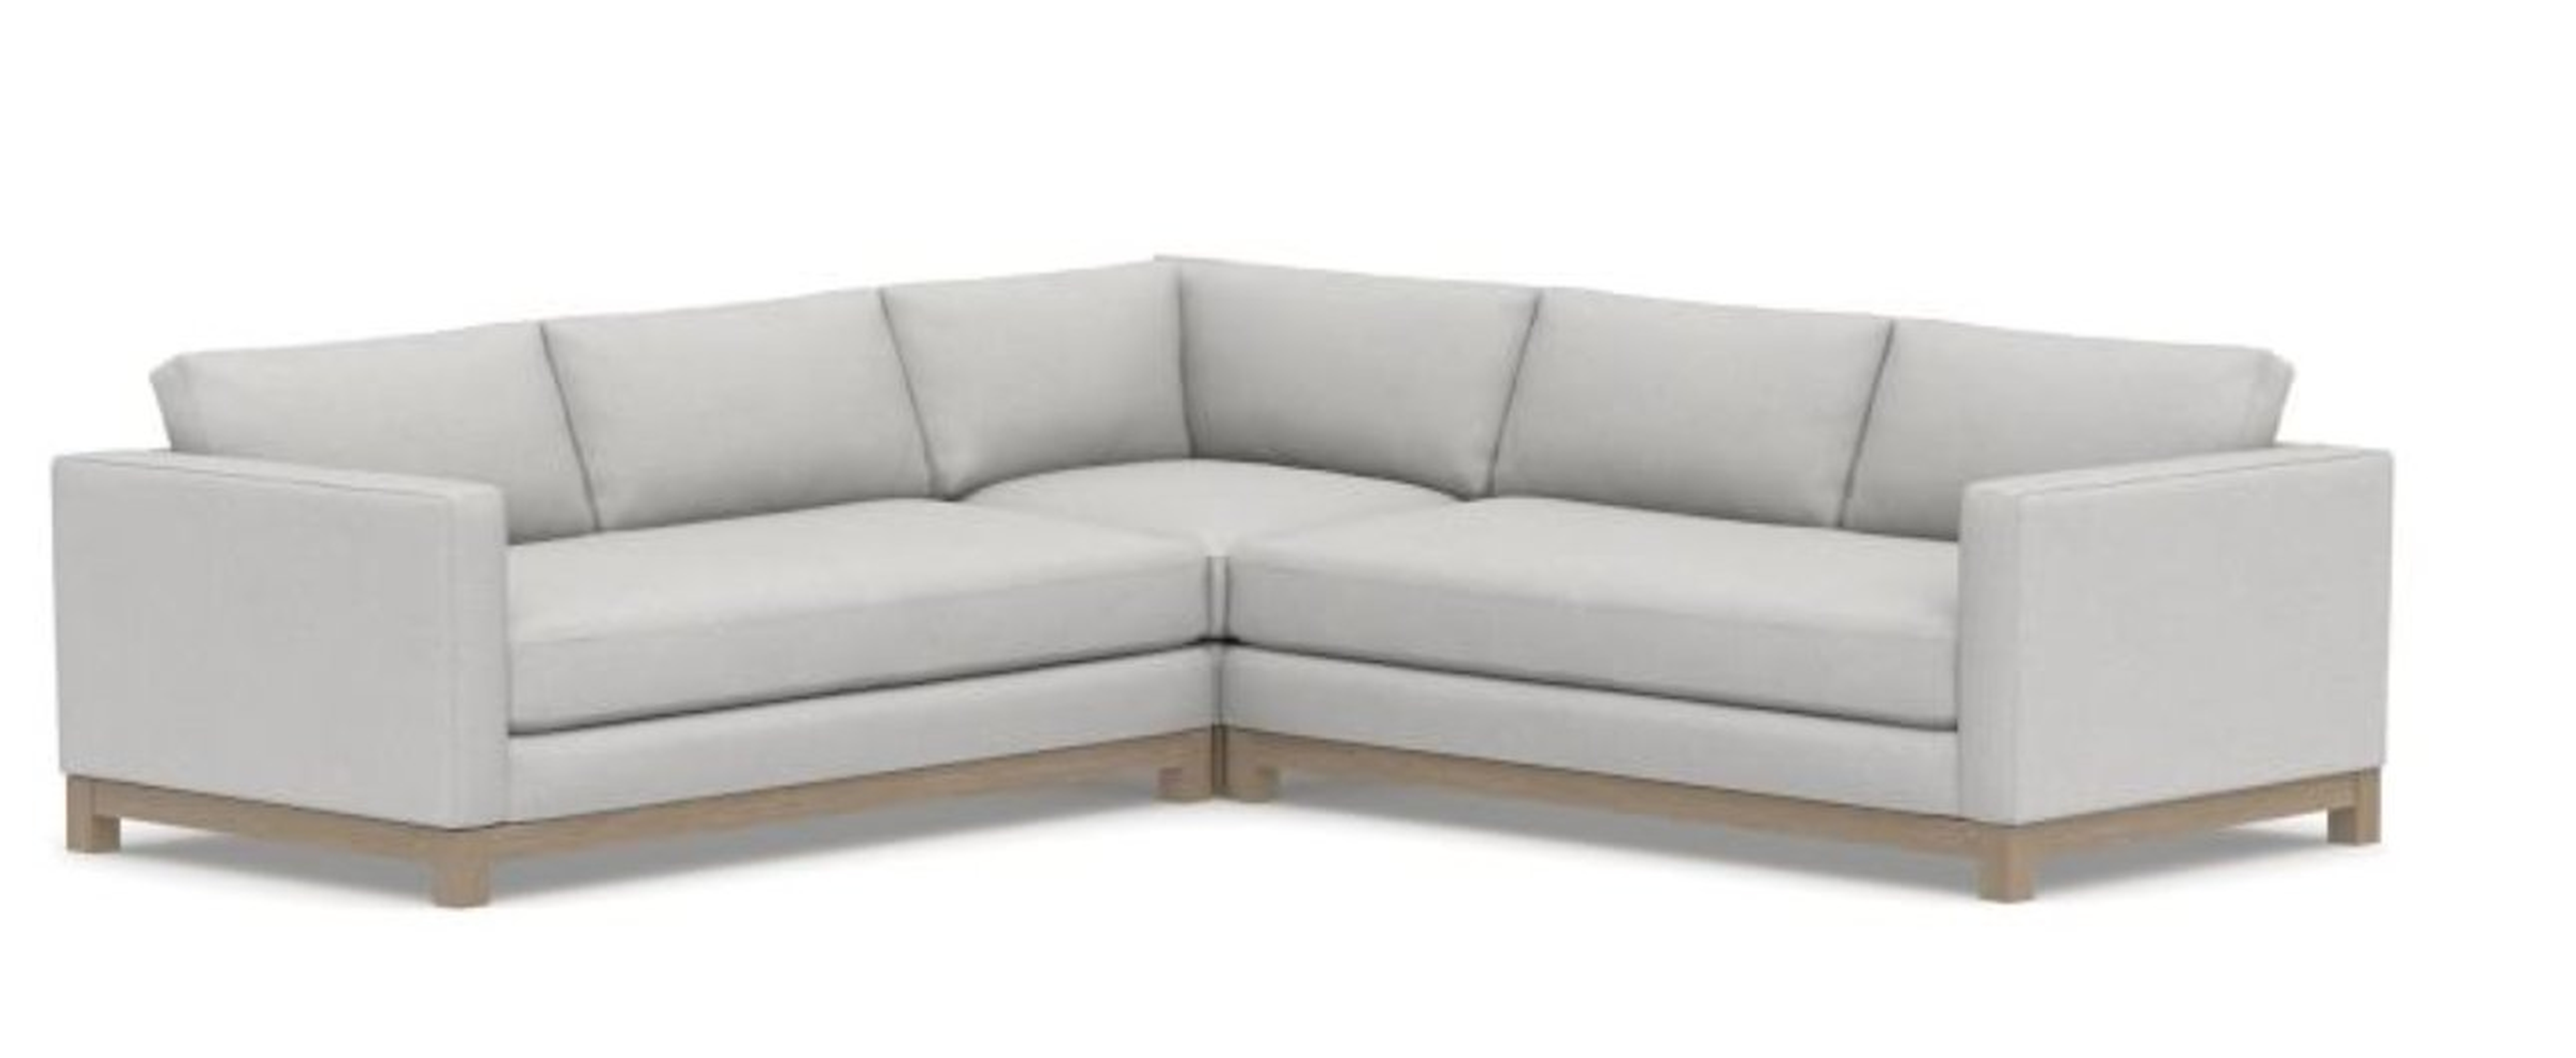 Jake Upholstered 3-Piece L-Shaped Corner Sectional with Wood Legs, Polyester Wrapped Cushions, Park Weave Ash - Pottery Barn